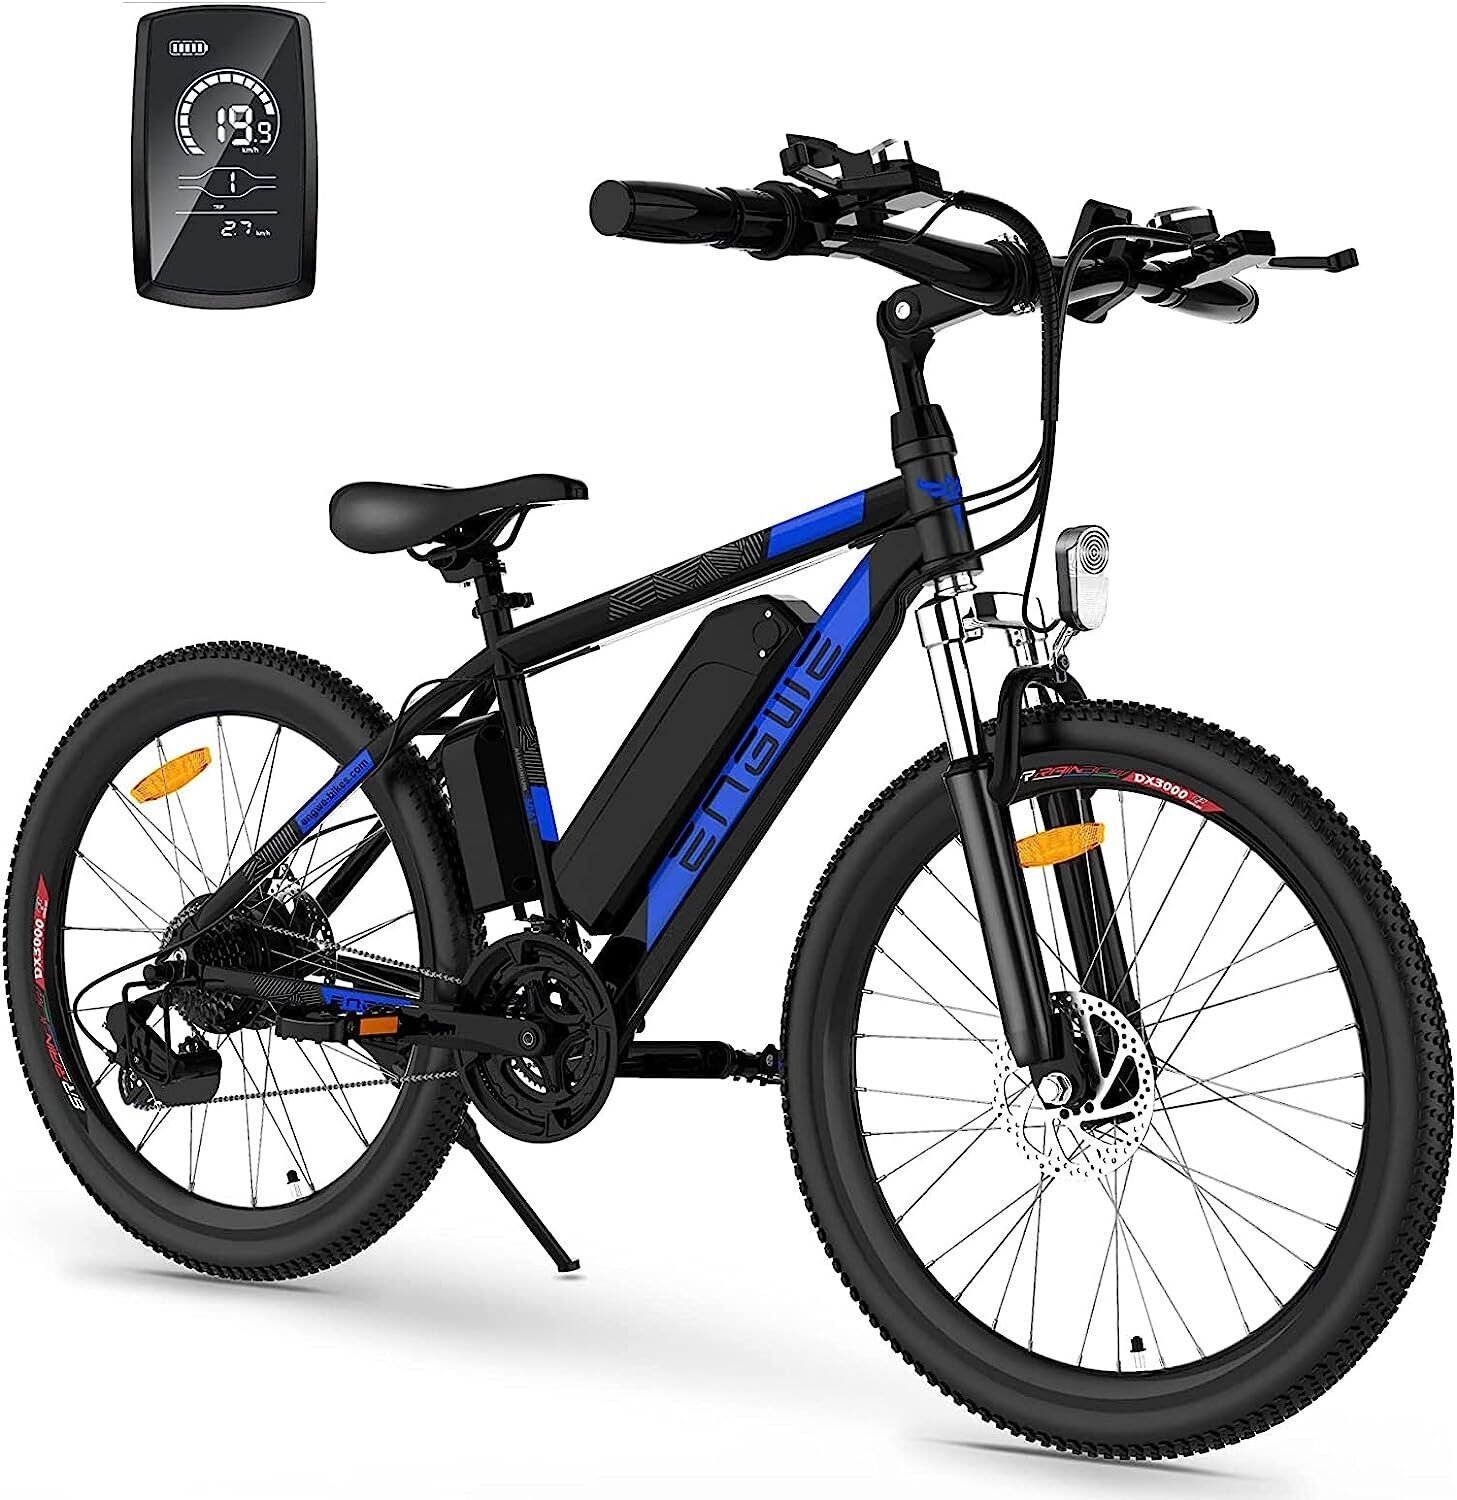 ENGWE 500W Electric Bike for Adults Classic 26â�� Electric Mountain Bicycle 48V10A